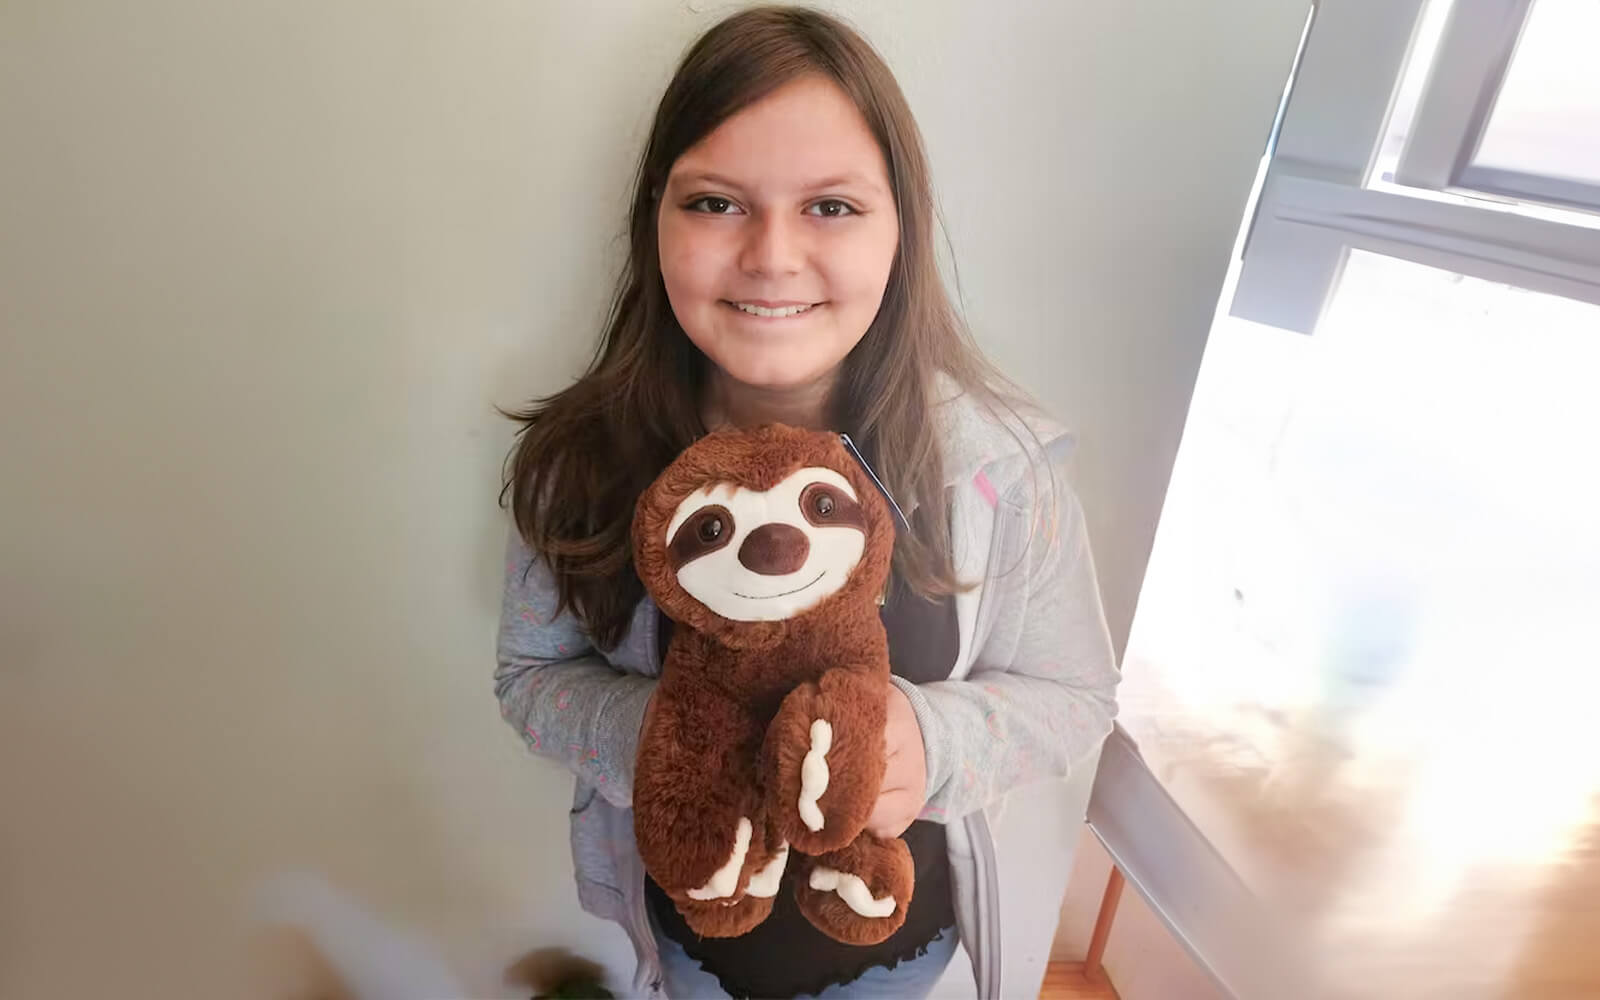 An image of a girl smiling holding Sam the Sloth